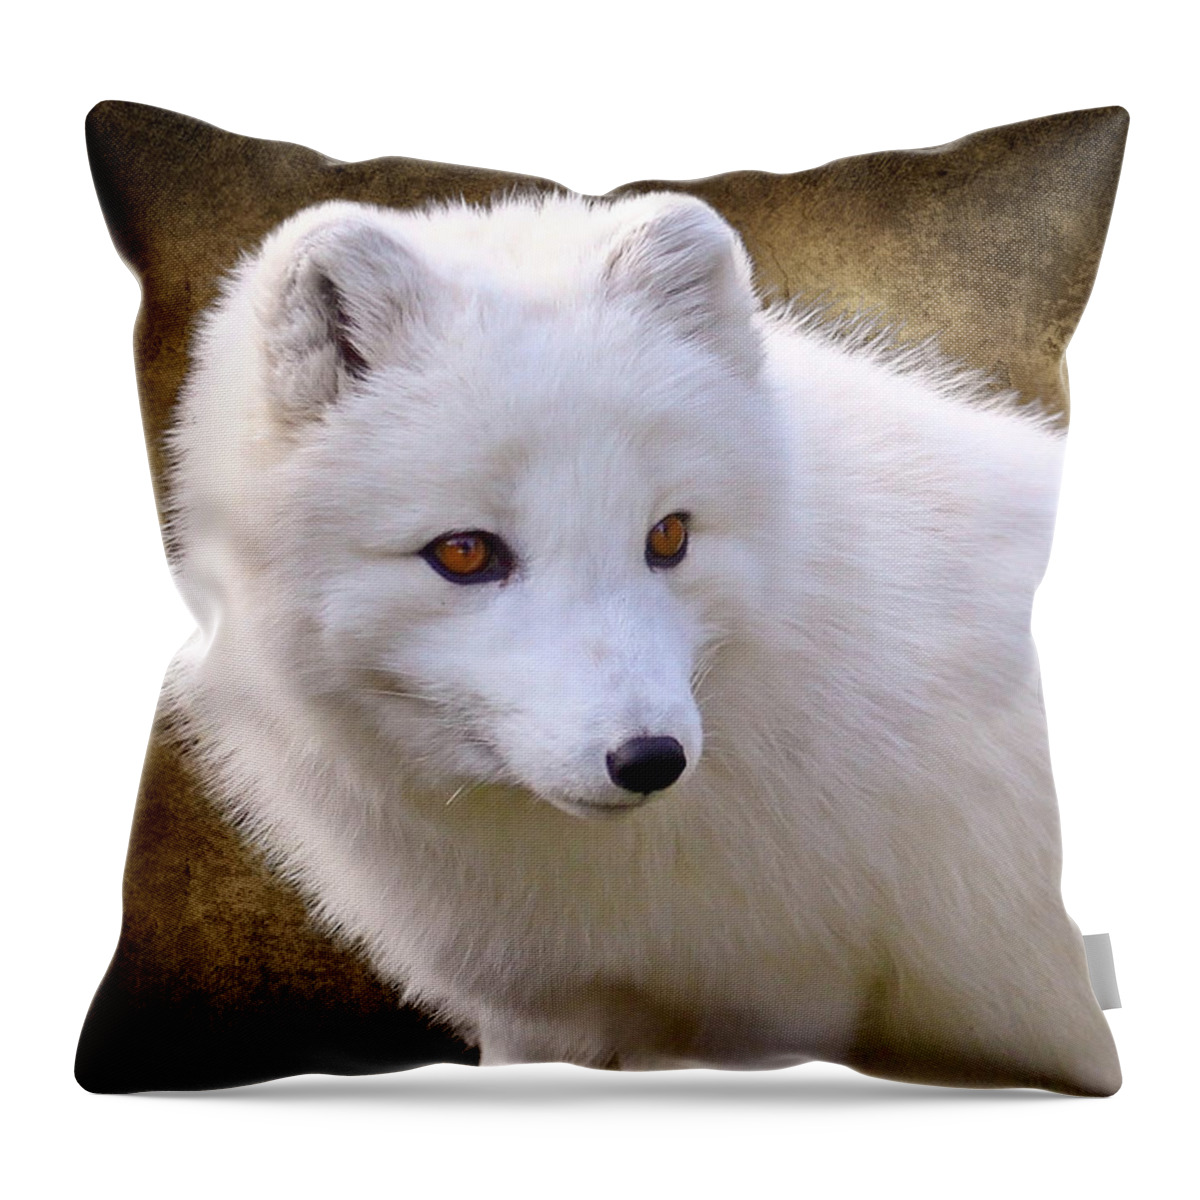 Arctic Fox Throw Pillow featuring the photograph White Arctic Fox by Steve McKinzie